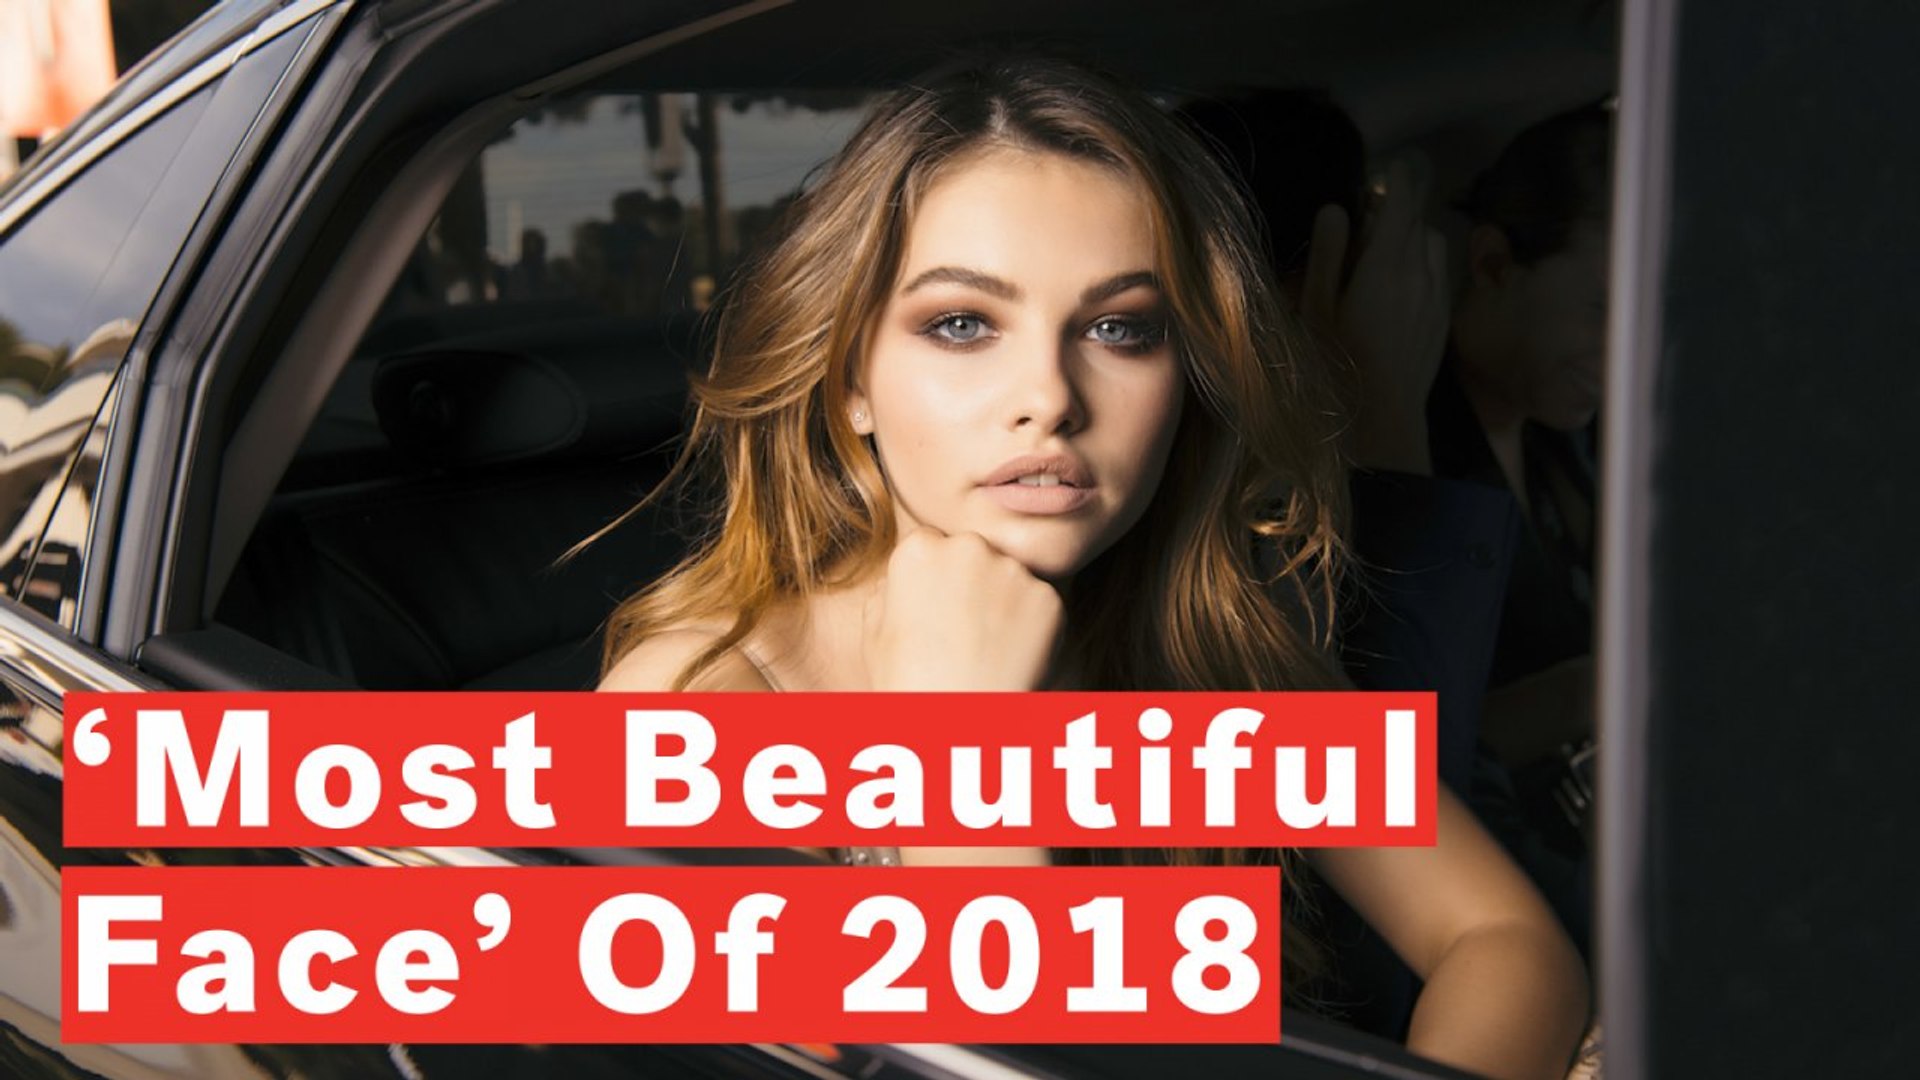 Thylane Blondeau Named Most Beautiful Face Of 2018 Video Images, Photos, Reviews